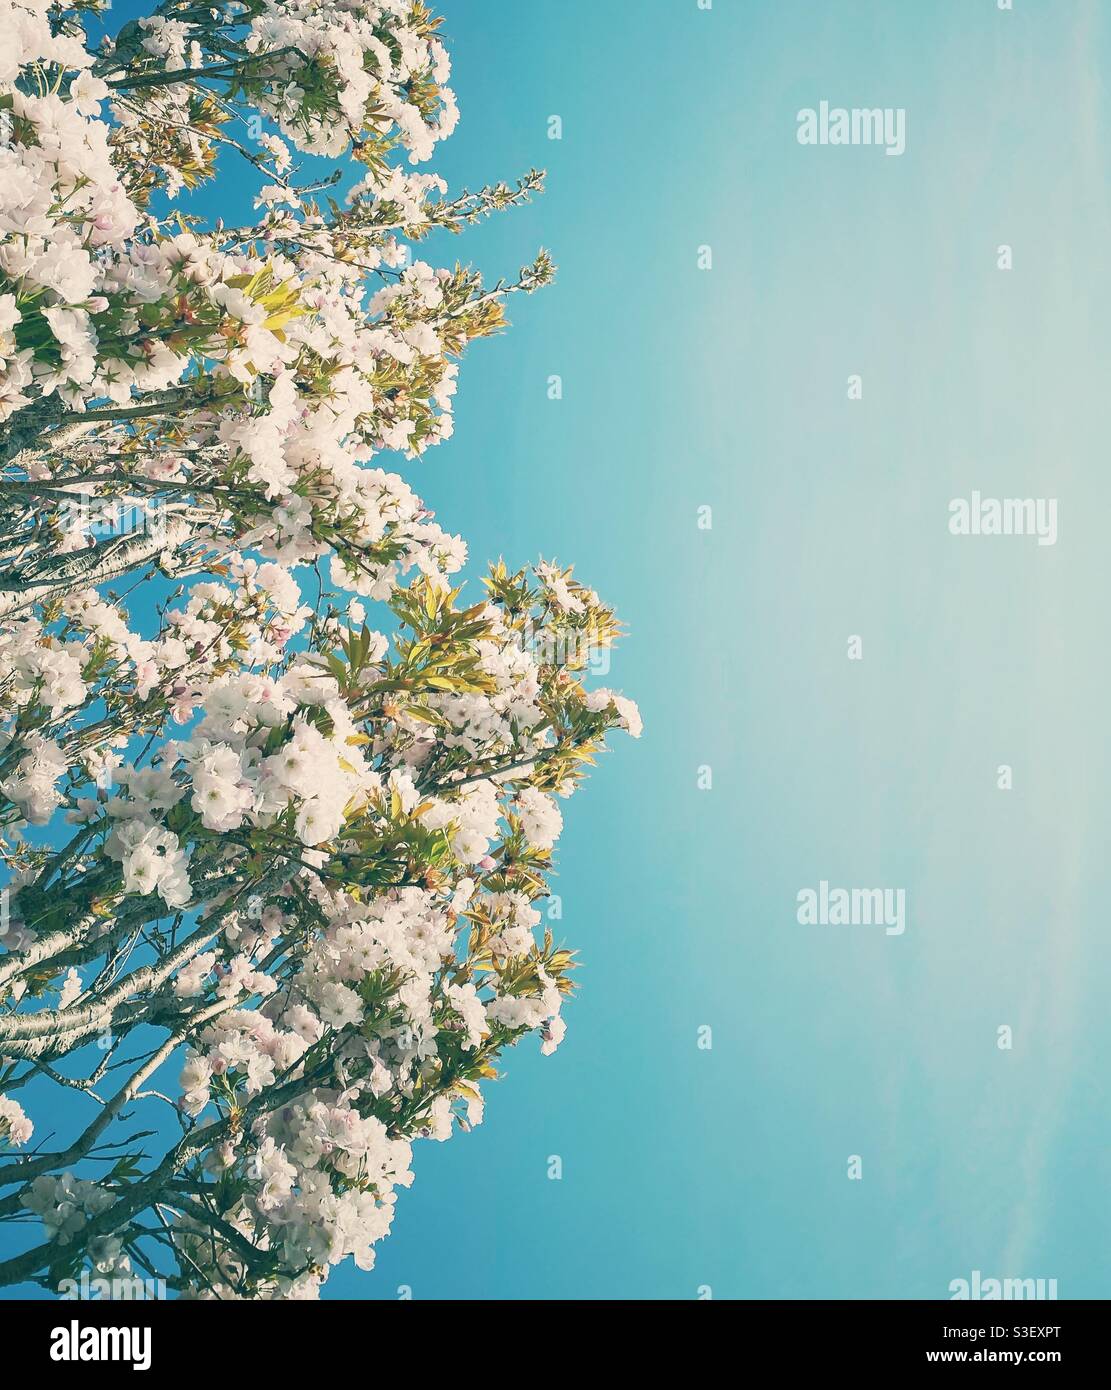 A photograph of delicate white and pink cherry blossom on a tree against a vivid turquoise sky Stock Photo